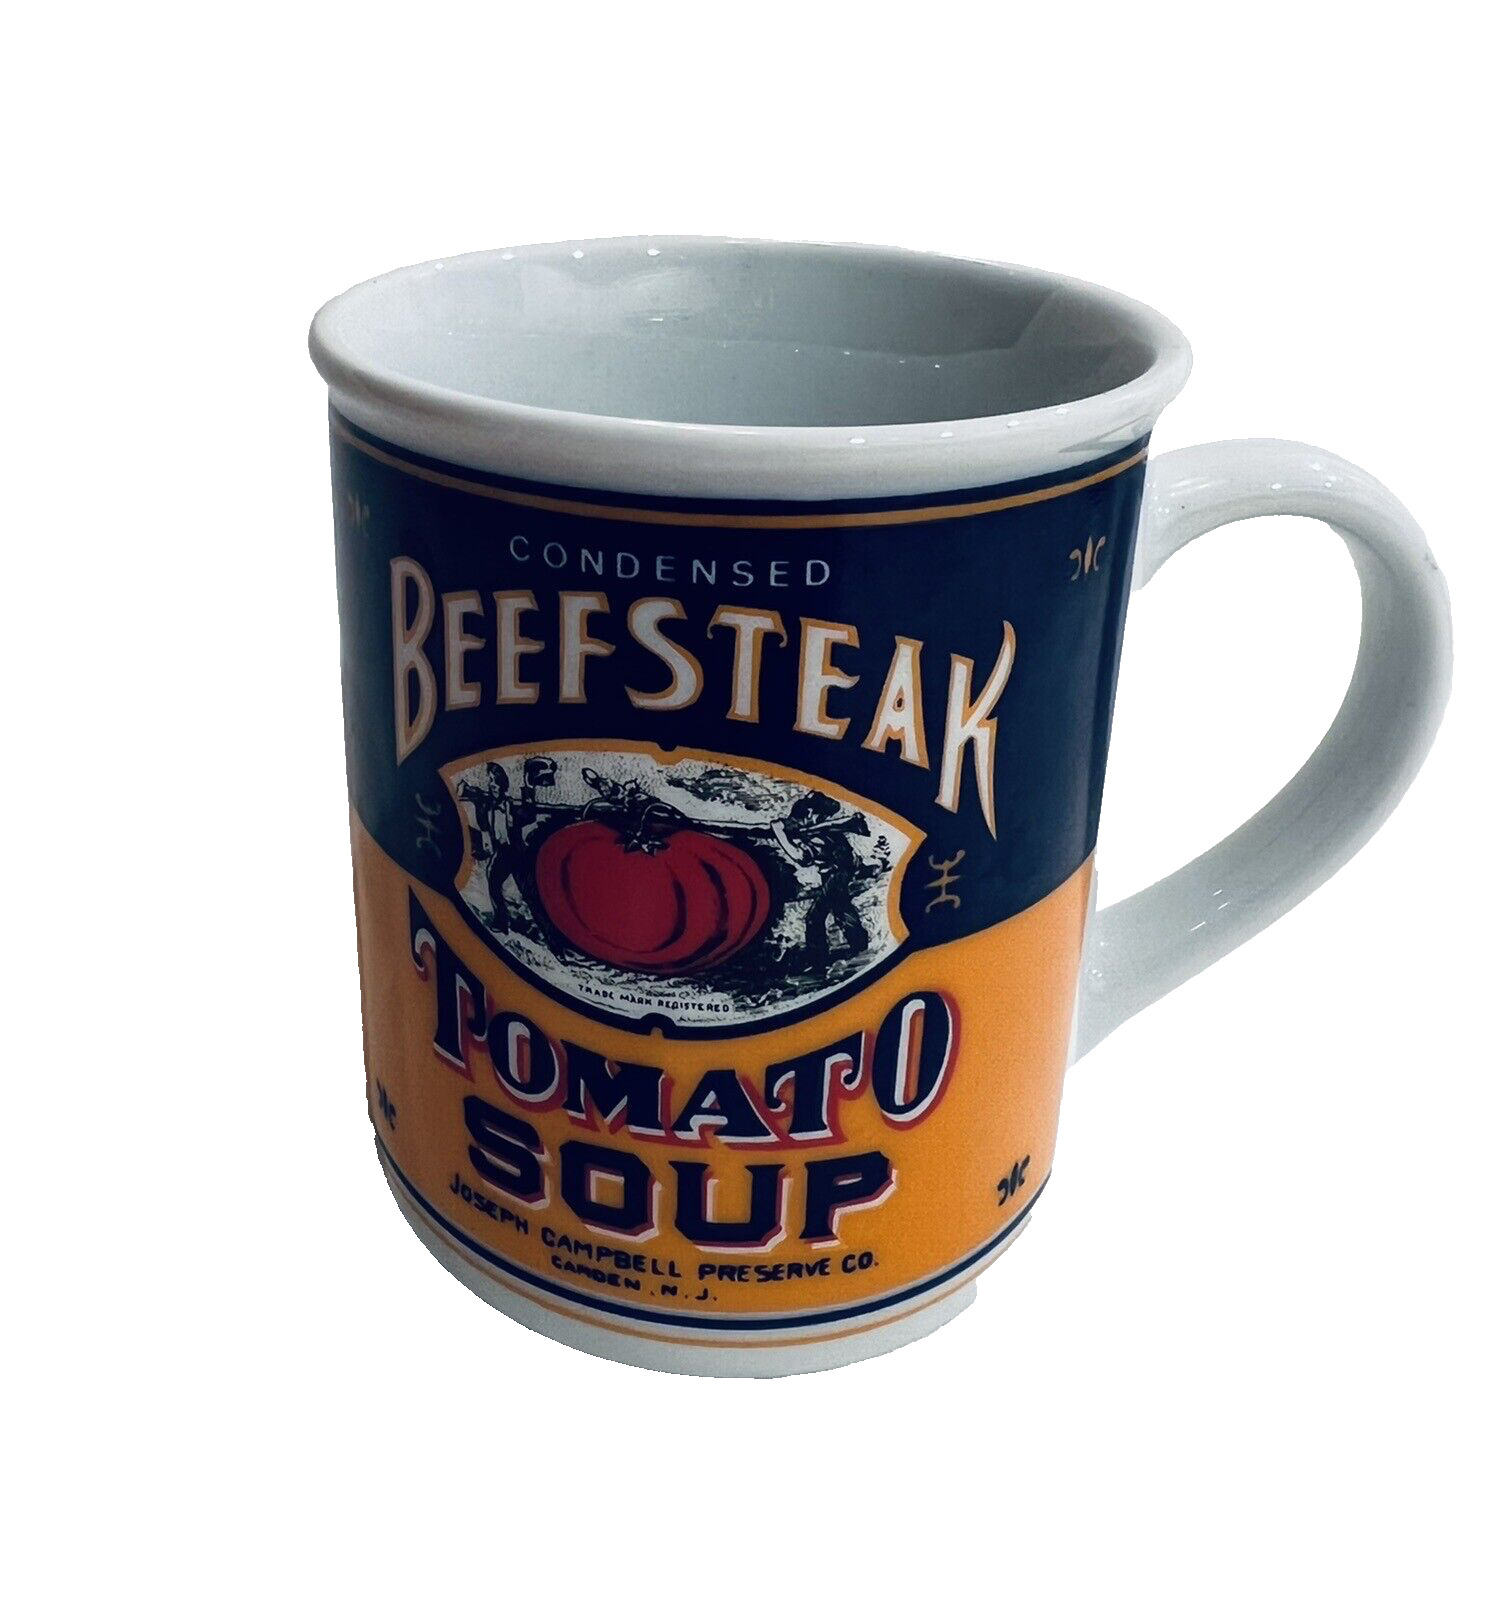 Campbells Soup Mug 125 Anniversary Collection Limited Beefsteak Tomato Soup